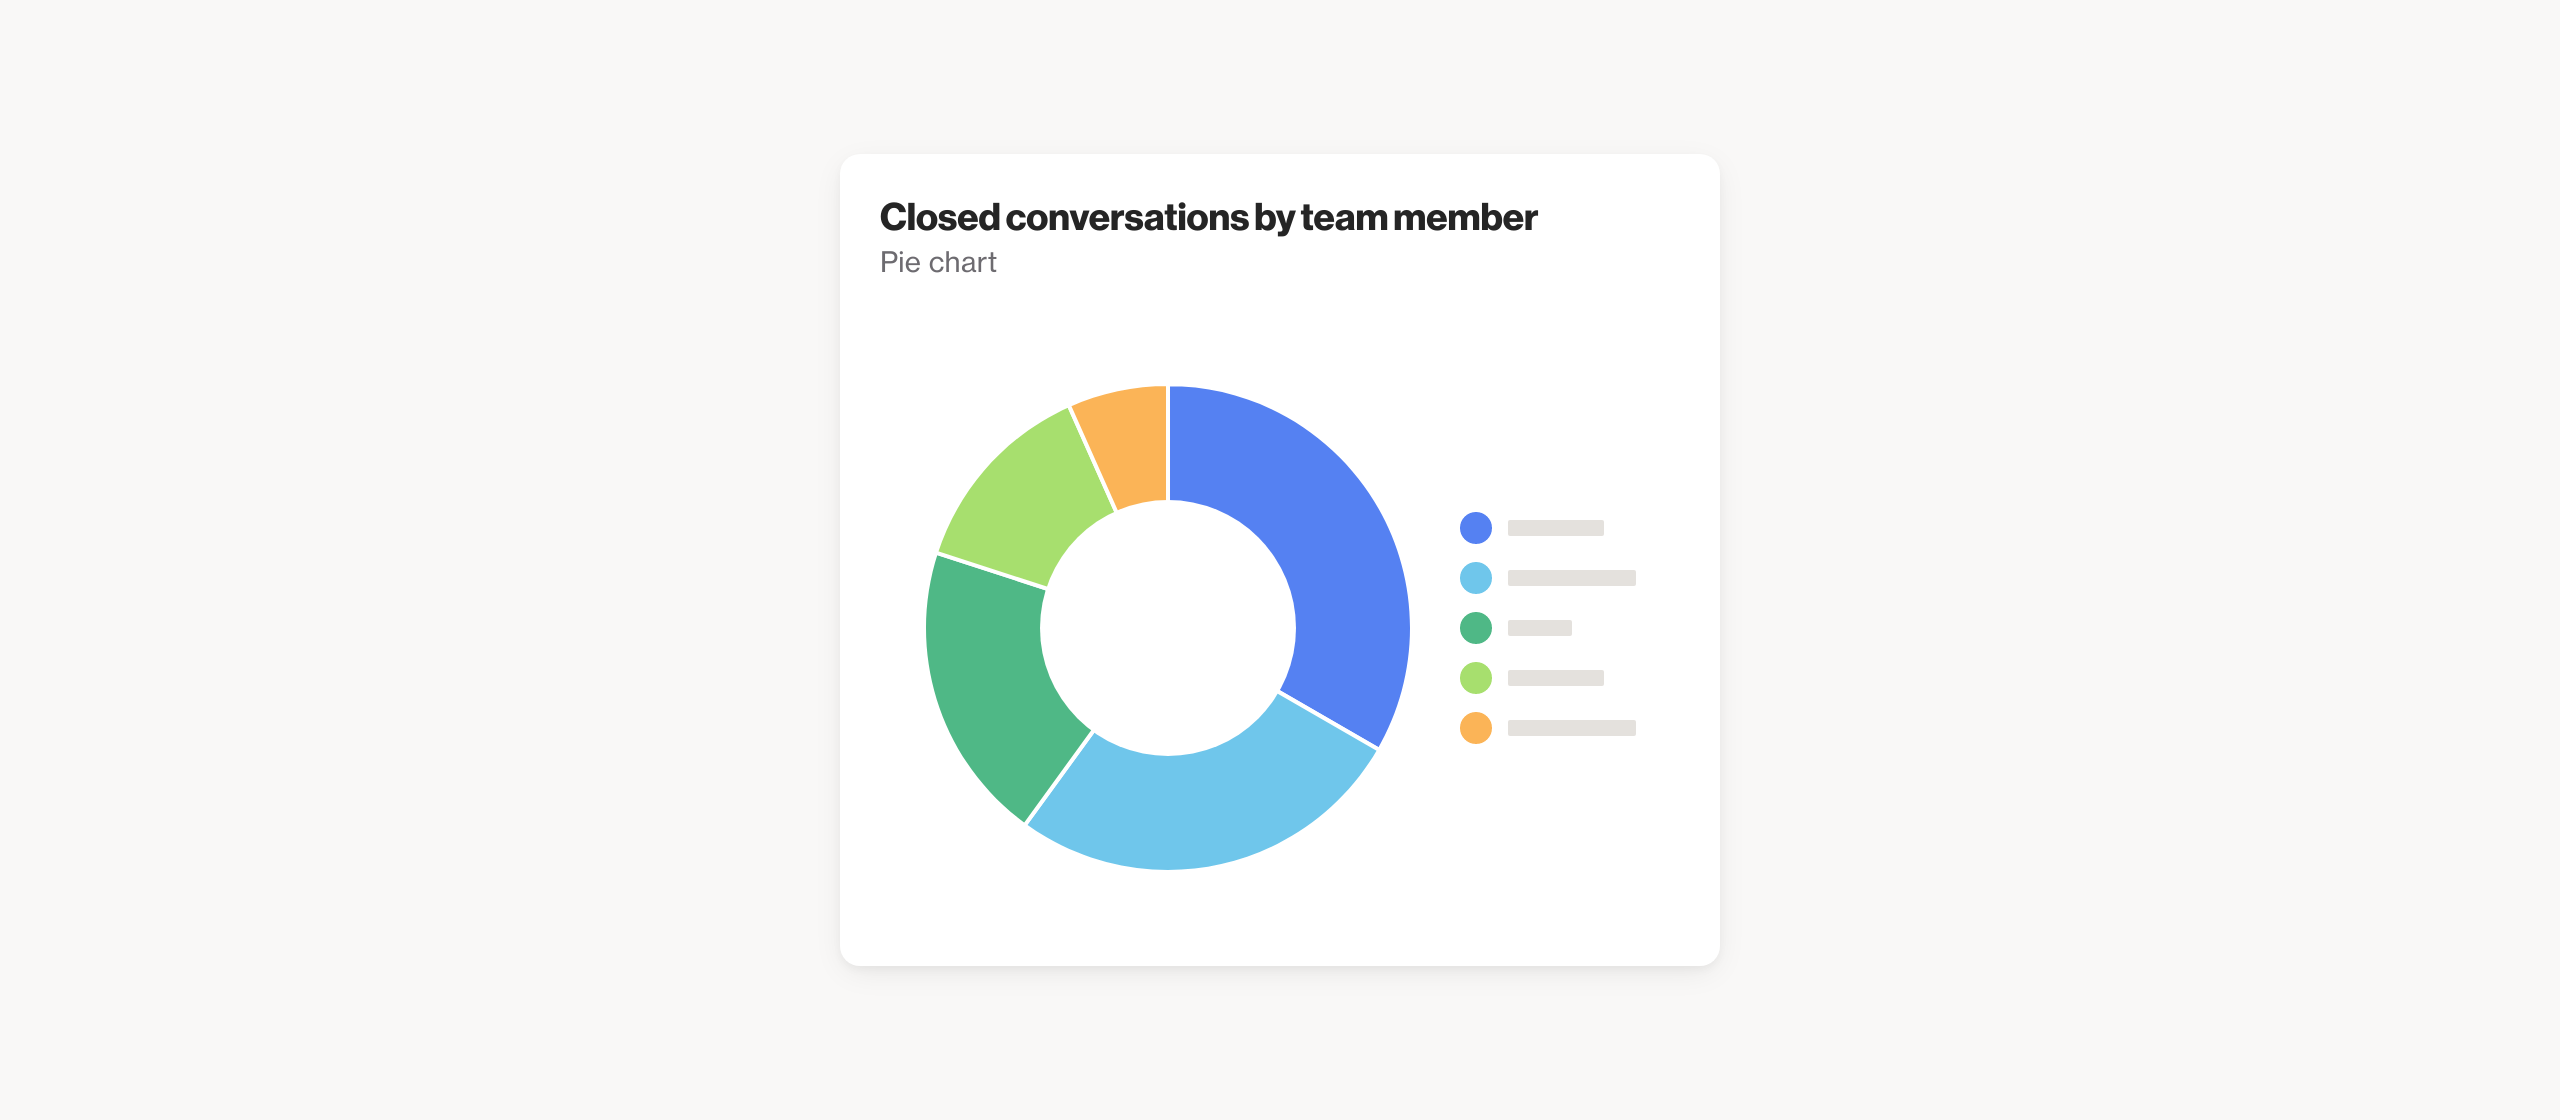 Closed conversations by team member